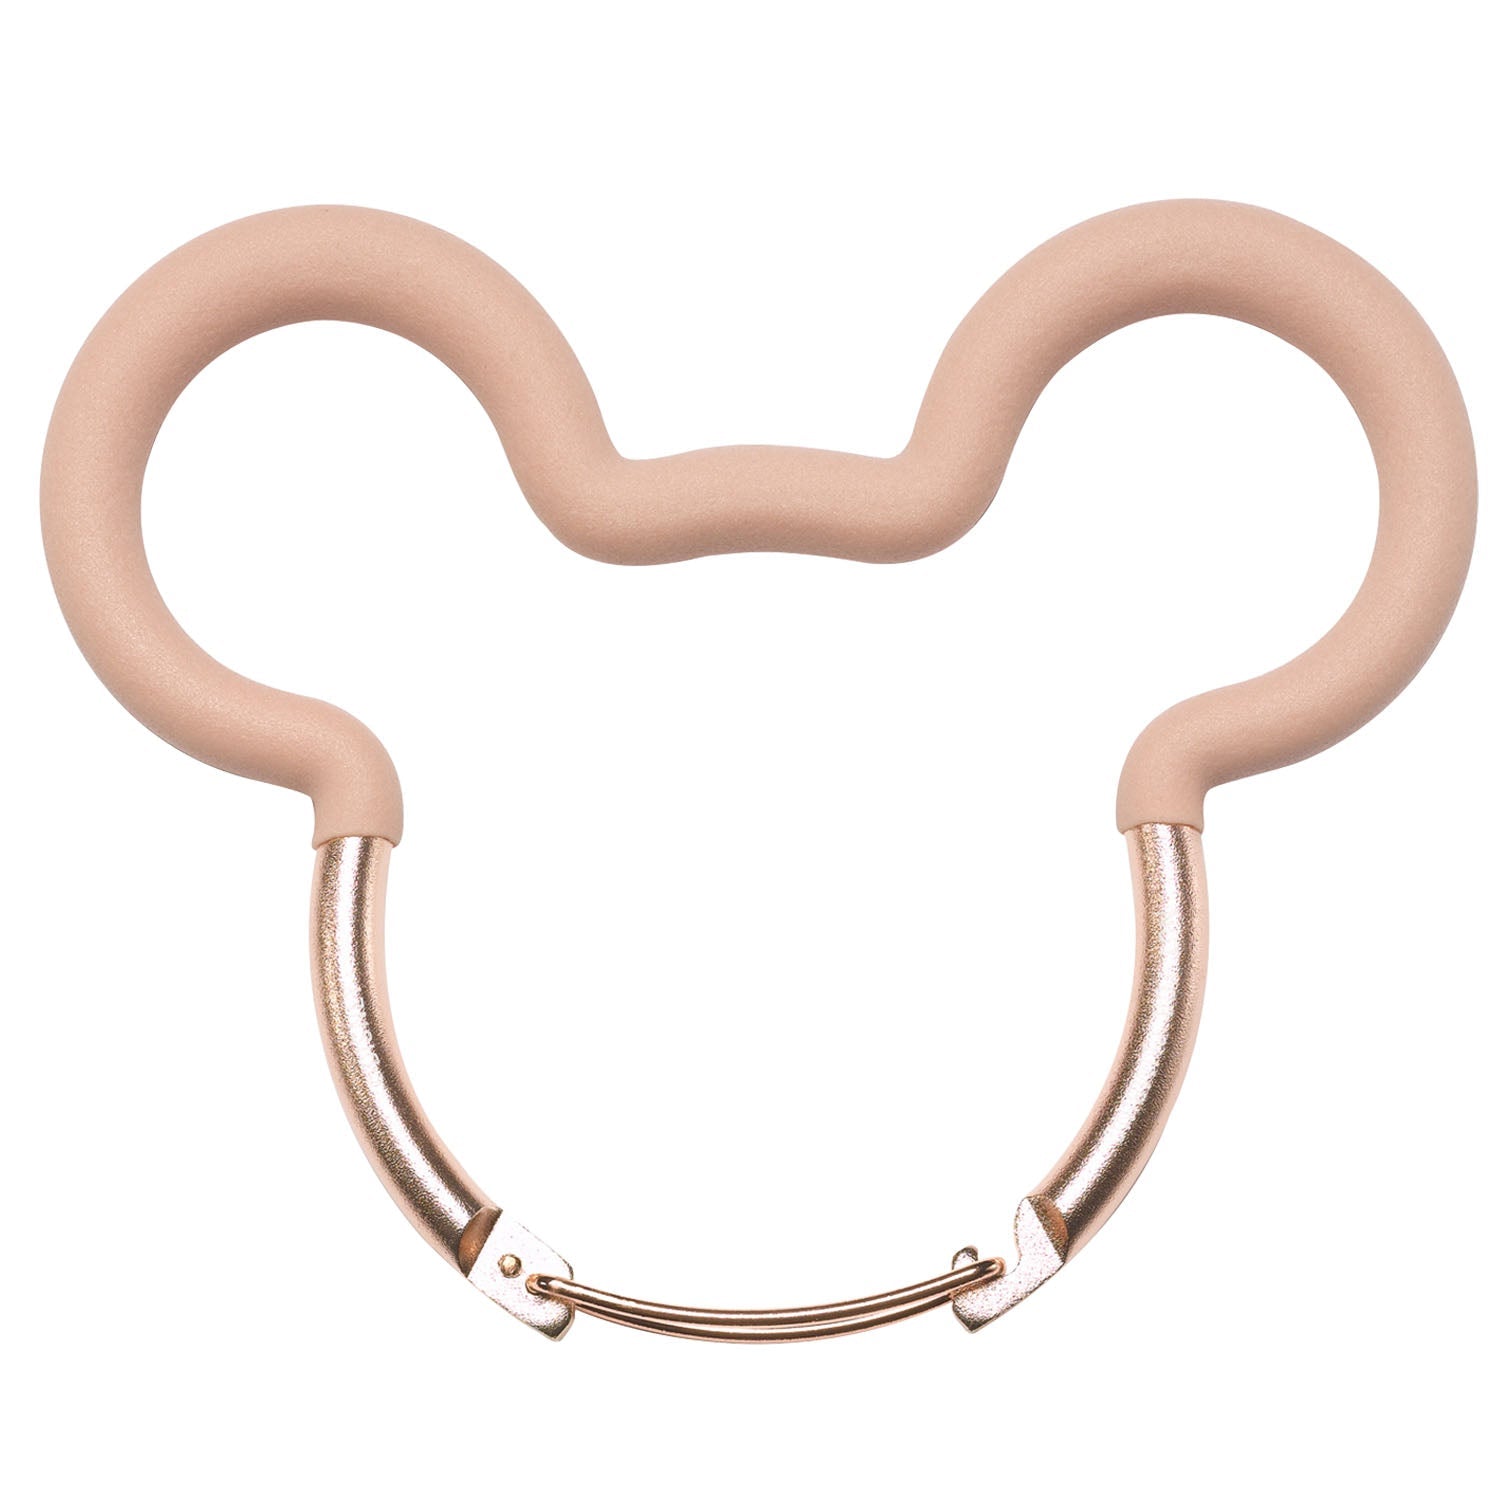 Petunia Pickle Bottom - Mickey Mouse Stroller Hook - Rose Gold